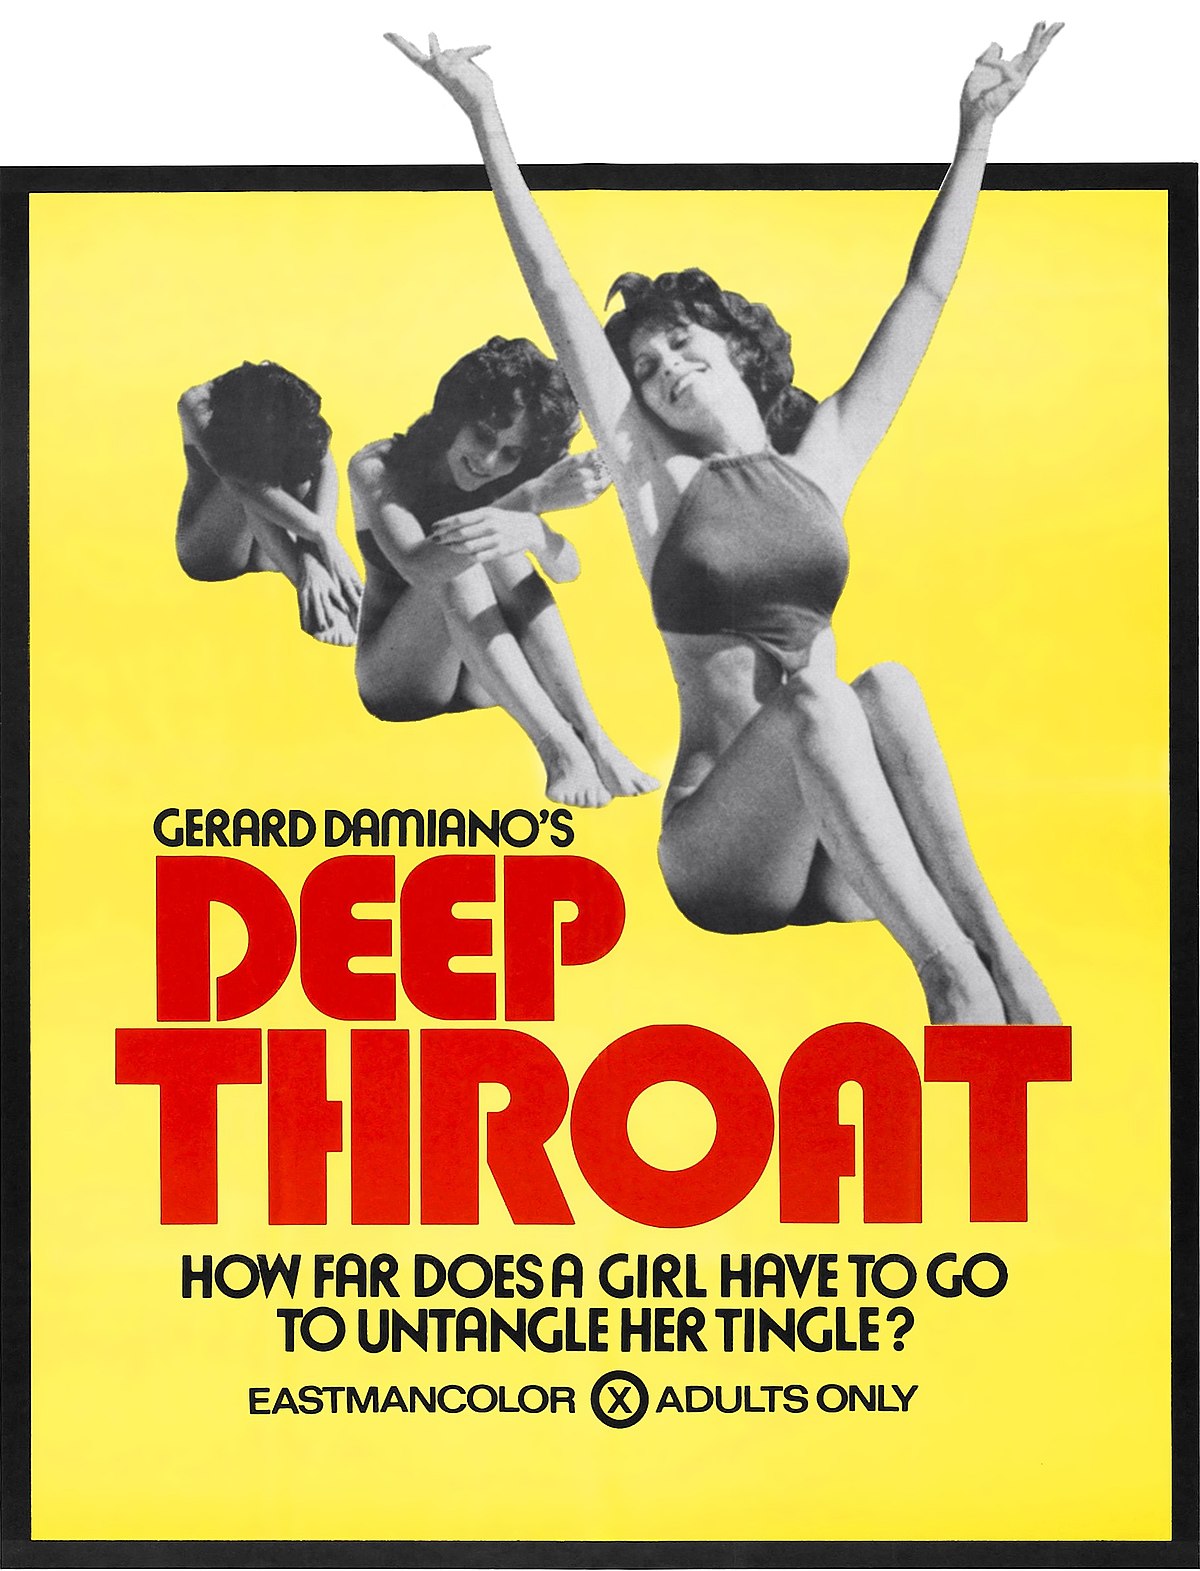 brian yakiwchuk recommends 25 Hd Uncut Full Vintage Erotic Drama Movies